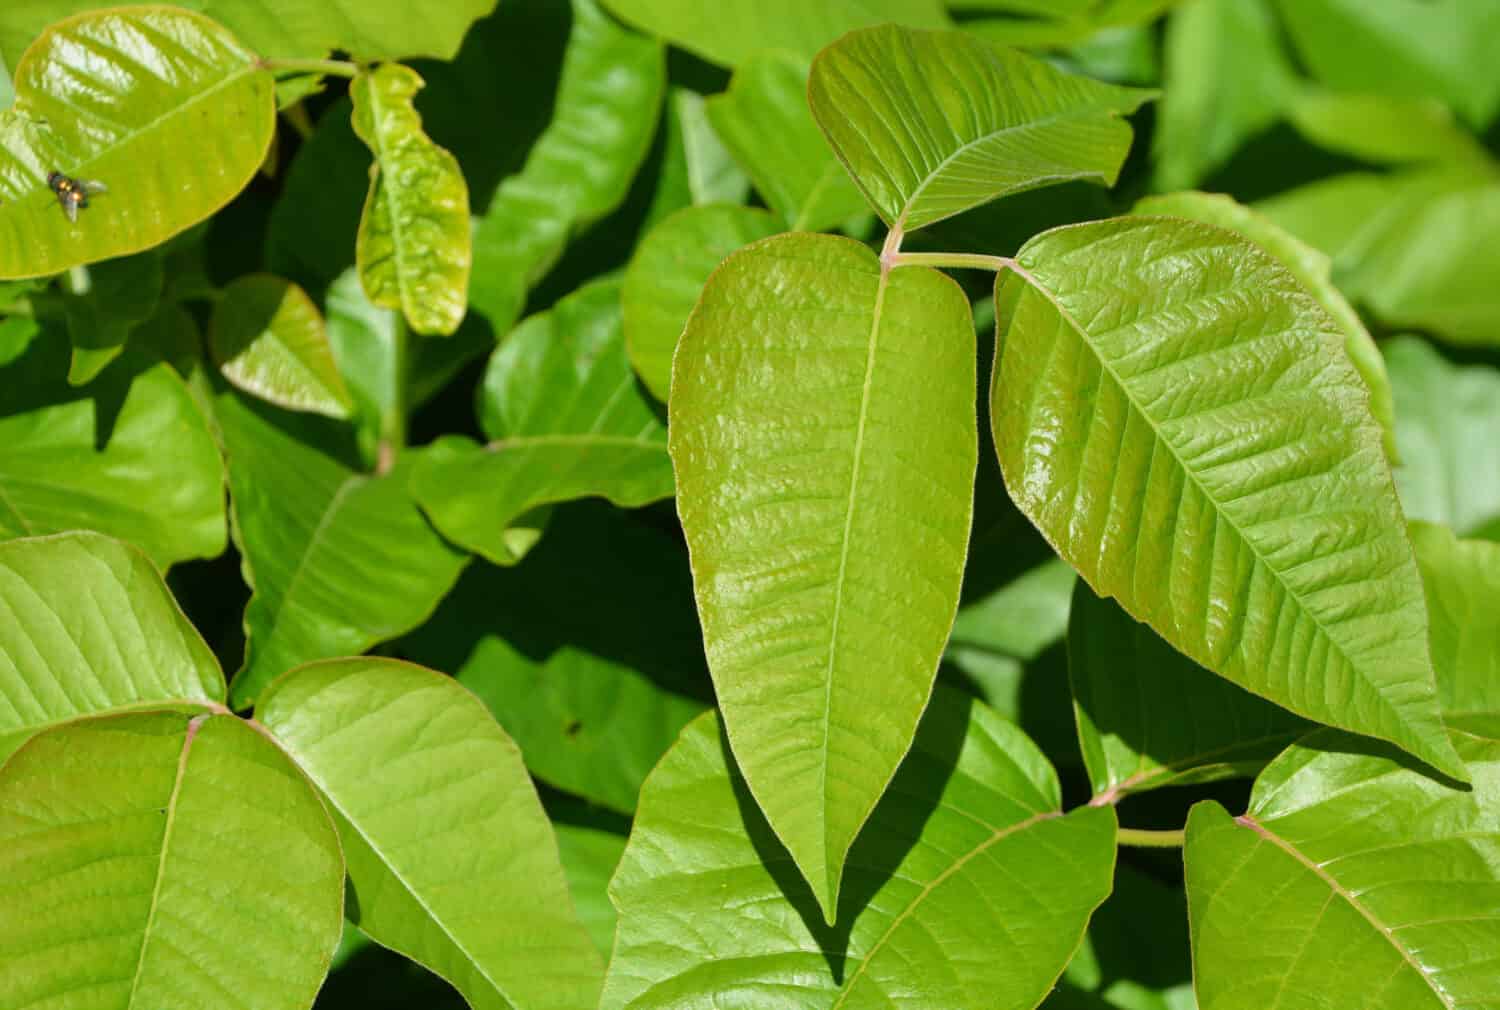 Toxicodendron radicans, commonly known as eastern poison ivy, is an allergenic Asian and Eastern North American flowering plant in the genus Toxicodendron. 